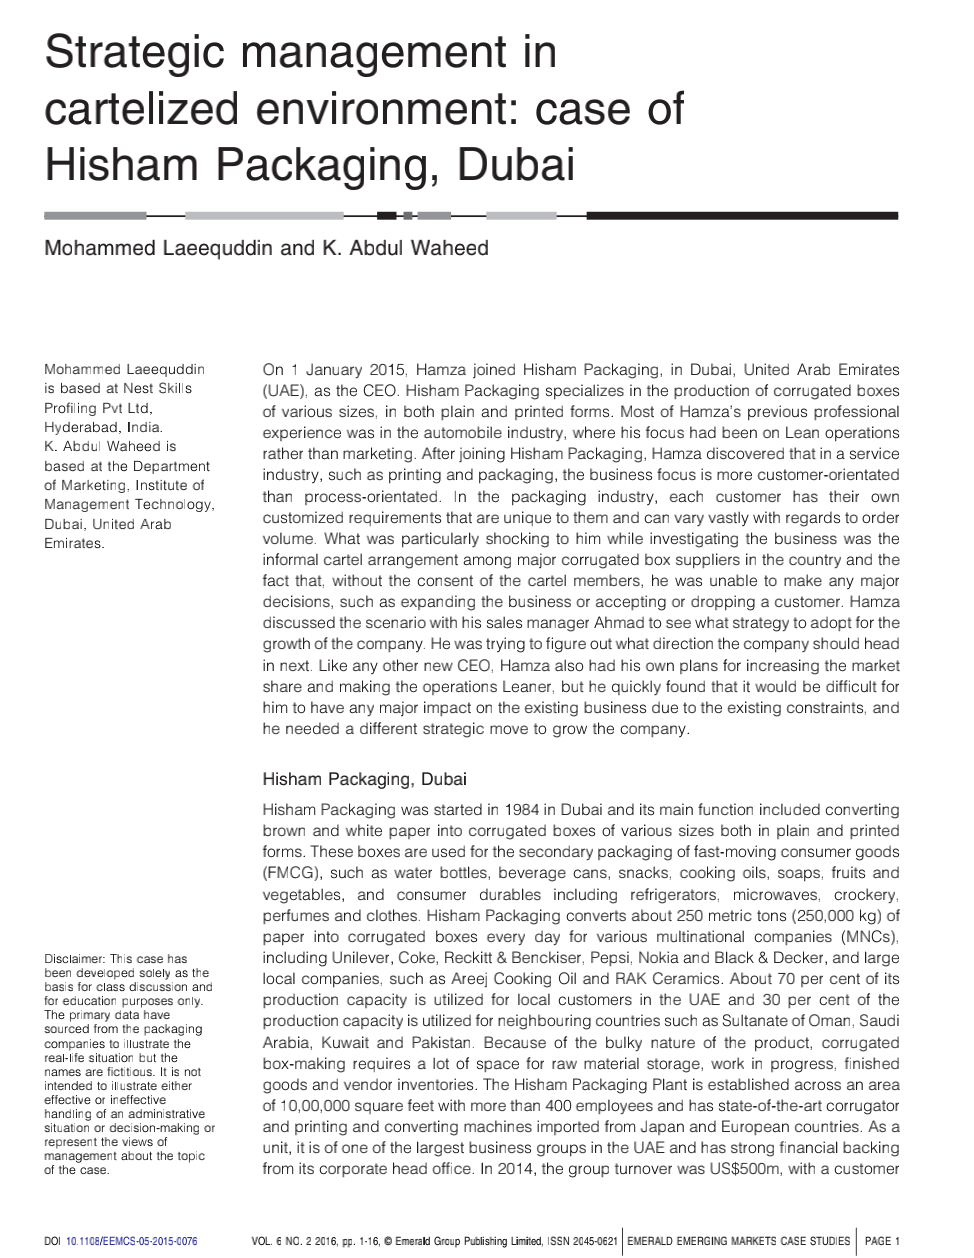 Strategic management in
cartelized environment: case of
Hisham Packaging, Dubai
Mohammed Laeequddin and K. Abdul Waheed
On 1 January 2015, Hamza joined Hisham Packaging, in Dubai, United Arab Emirates
(UAE), as the CEO. Hisham Packaging specializes in the production of corrugated boxes
of various sizes, in both plain and printed forms. Most of Hamza's previous professional
experience was in the automobile industry, where his focus had been on Lean operations
rather than marketing. After joining Hisham Packaging, Hamza discovered that in a service
industry, such as printing and packaging, the business focus is more customer-orientated
than process-orientated. In the packaging industry, each customer has their own
customized requirements that are unique to them and can vary vastly with regards to order
volume. What was particularly shocking to him while investigating the business was the
informal cartel arrangement among major corrugated box suppliers in the country and the
fact that, without the consent of the cartel members, he was unable to make any major
decisions, such as expanding the business or accepting or dropping a customer. Hamza
discussed the scenario with his sales manager Ahmad to see what strategy to adopt for the
growth of the company. He was trying to figure out what direction the company should head
in next. Like any other new CEO, Hamza also had his own plans for increasing the market
share and making the operations Leaner, but he quickly found that it would be difficult for
him to have any major impact on the existing business due to the existing constraints, and
he needed a different strategic move to grow the company.
Mohammed Laeequddin
is based at Nest Skills
Profiling Pvt Ltd,
Hyderabad, India.
K. Abdul Waheed is
based at the Department
of Marketing, Institute of
Management Technology,
Dubai, United Arab
Emirates.
Hisham Packaging, Dubai
Hisham Packaging was started in 1984 in Dubai and its main function included converting
brown and white paper into corrugated boxes of various sizes both in plain and printed
forms. These boxes are used for the secondary packaging of fast-moving consumer goods
(FMCG), such as water bottles, beverage cans, snacks, cooking oils, soaps, fruits and
vegetables, and consumer durables including refrigerators, microwaves, crockery,
perfumes and clothes. Hisham Packaging converts about 250 metric tons (250,000 kg) of
paper into corrugated boxes every day for various multinational companies (MNCS),
including Unilever, Coke, Reckitt & Benckiser, Pepsi, Nokia and Black & Decker, and large
local companies, such as Areej Cooking Oil and RAK Ceramics. About 70 per cent of its
production capacity is utilized for local customers in the UAE and 30 per cent of the
production capacity is utilized for neighbouring countries such as Sultanate of Oman, Saudi
Arabia, Kuwait and Pakistan. Because of the bulky nature of the product, corrugated
box-making requires a lot of space for raw material storage, work in progress, finished
goods and vendor inventories. The Hisham Packaging Plant is established across an area
of 10,00,000 square feet with more than 400 employees and has state-of-the-art corrugator
and printing and converting machines imported from Japan and European countries. As a
unit, it is of one of the largest business groups in the UAE and has strong financial backing
from its corporate head office. In 2014, the group turnover was US$500m, with a customer
Disclaimer: This case has
been developed solely as the
basis for class discussion and
for education purposes only.
The primary data have
sourced from the packaging
companies to illustrate the
real-life situation but the
names are fictitious. It is not
intended to ill ustrate either
effective or ineffective
handling of an administrative
situation or decision-making or
represent the views of
management about the topic
of the case.
DOI 10.1108/EEMCS-05-2015-0076
VOL. 6 NO. 2 2016, pp. 1-16, © Emerald Graup Publishing Limited, ISSN 2045-0621 EMERALD EMERGING MARKETS CASE STUDIES
PAGE 1
